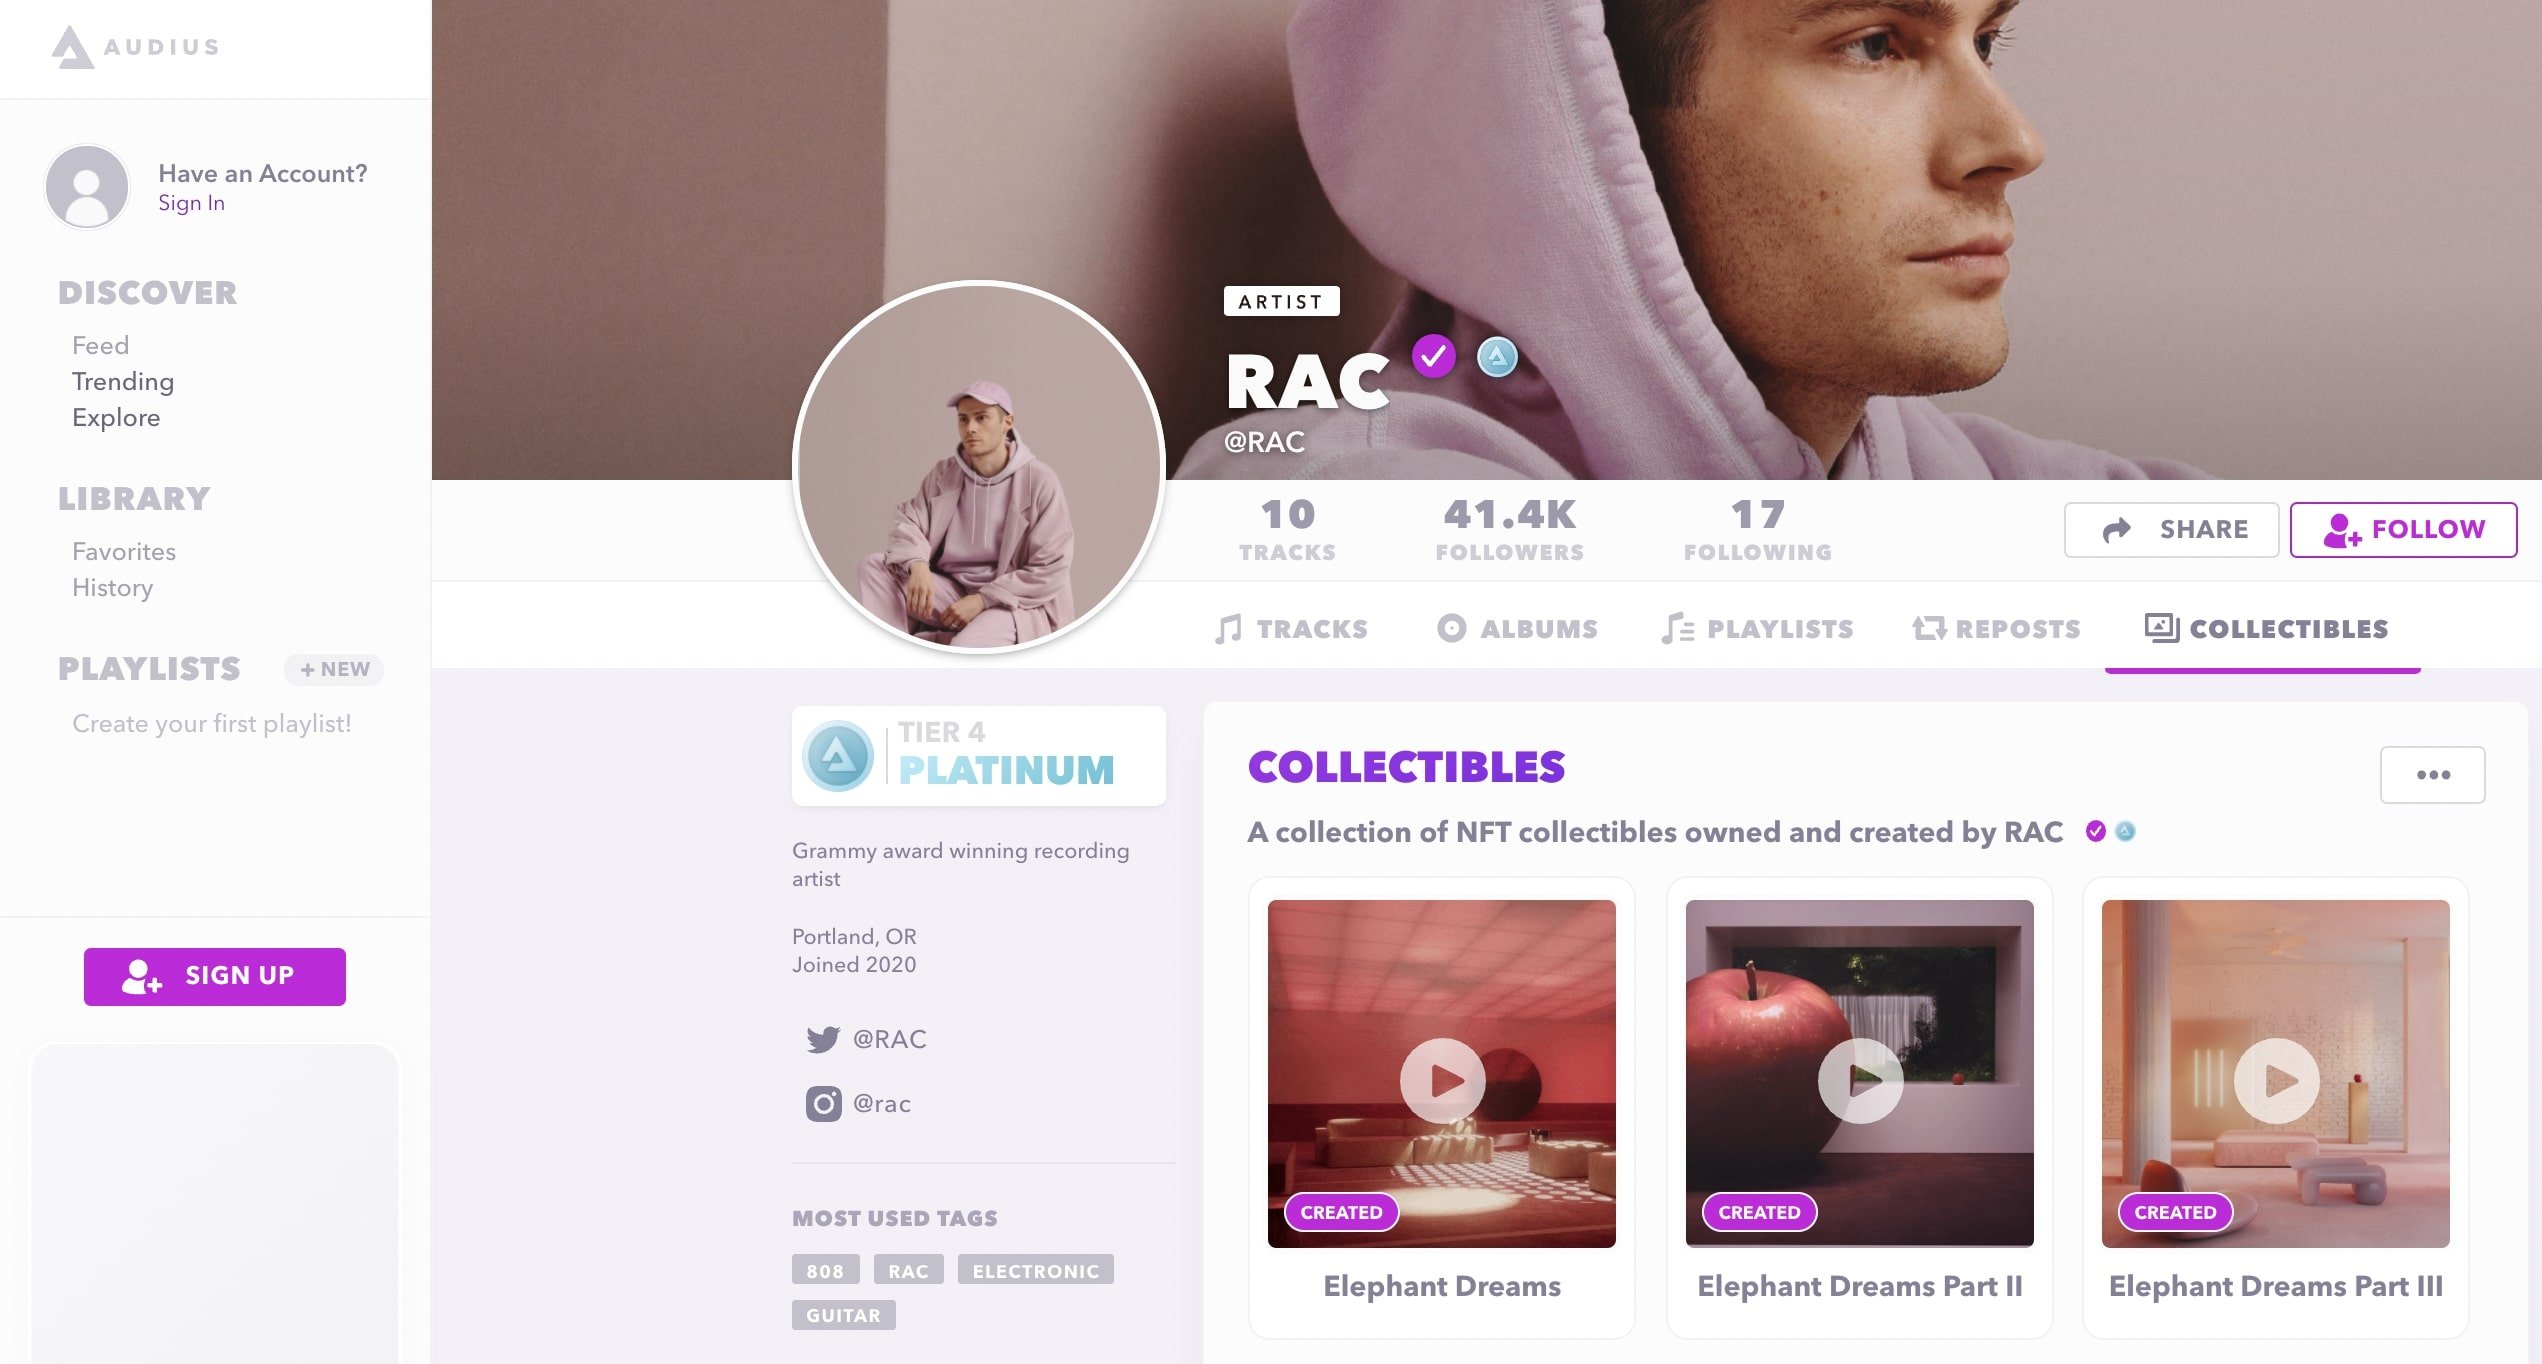 Audius profile of artist RAC featuring NFTs